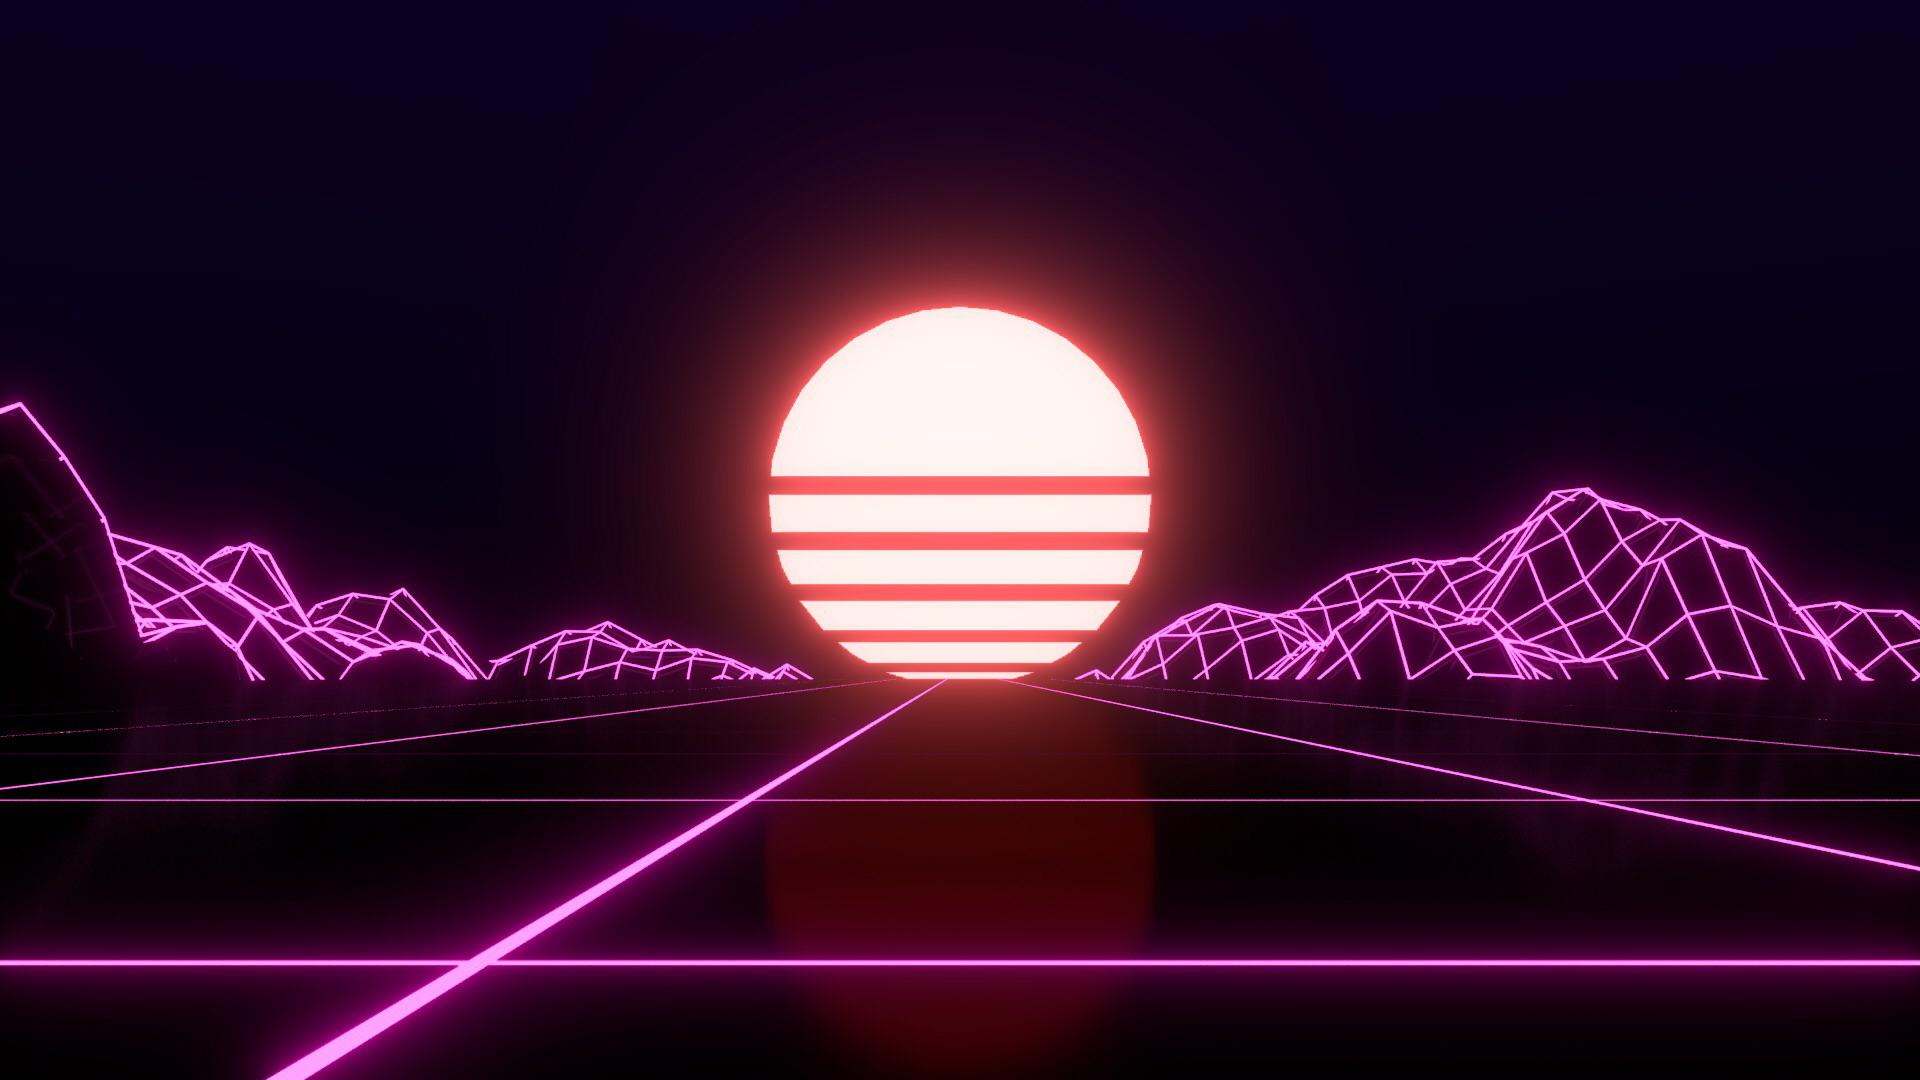 So I been tryna get my phone more synthwave cyberpunk feel. Got wallpaper down any other ways it to that crisp 80s feel?